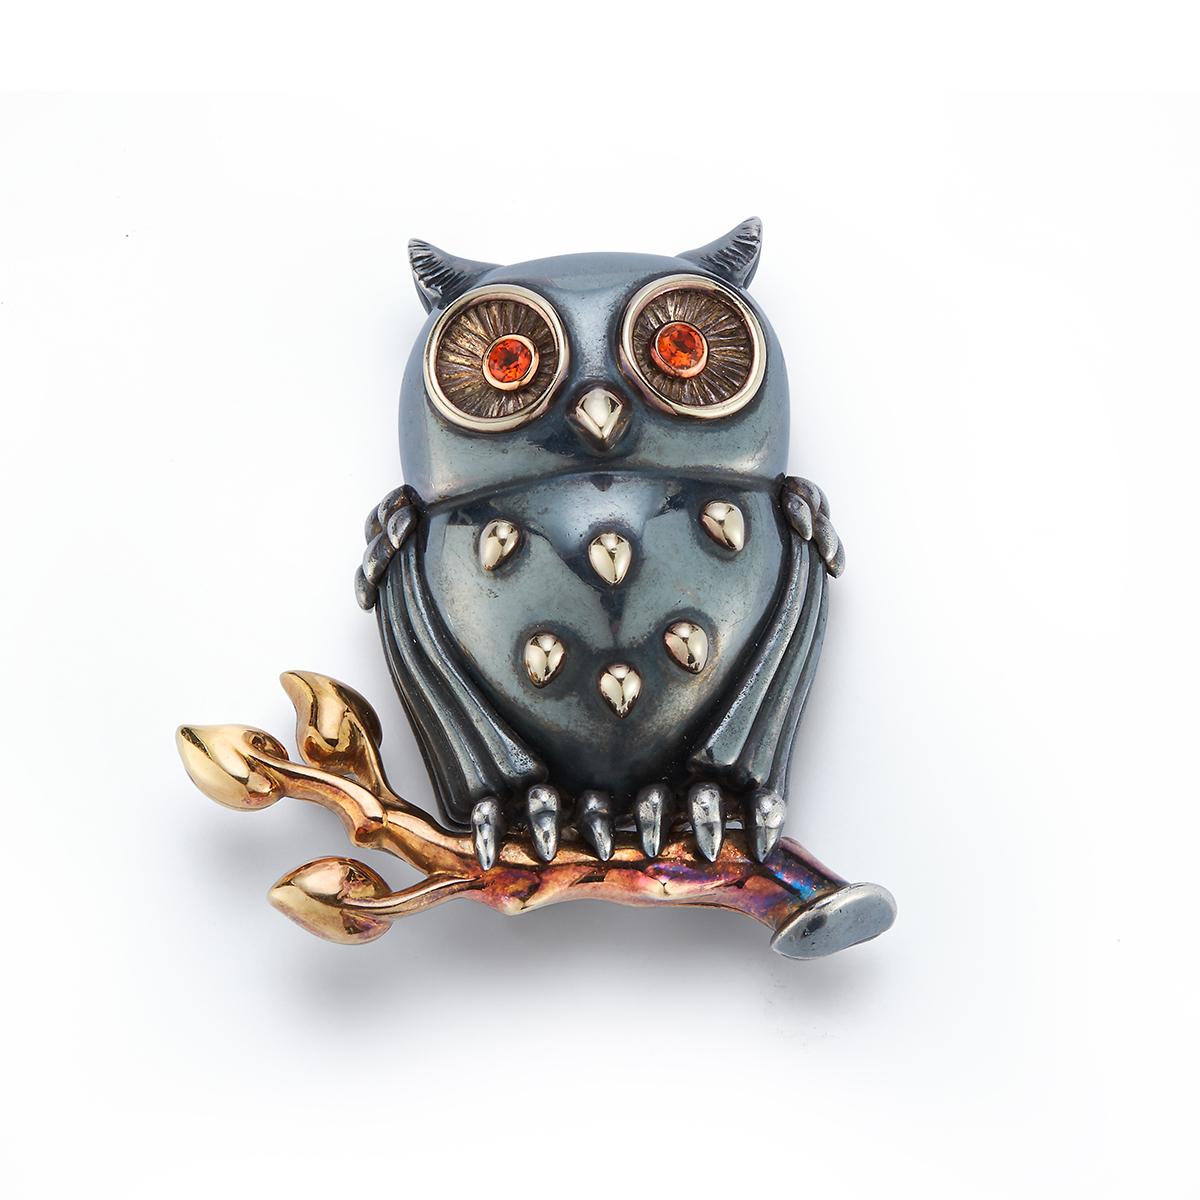 Rene Boivin Owl Brooch, with two round cut citrines eyes
Measurements: 2